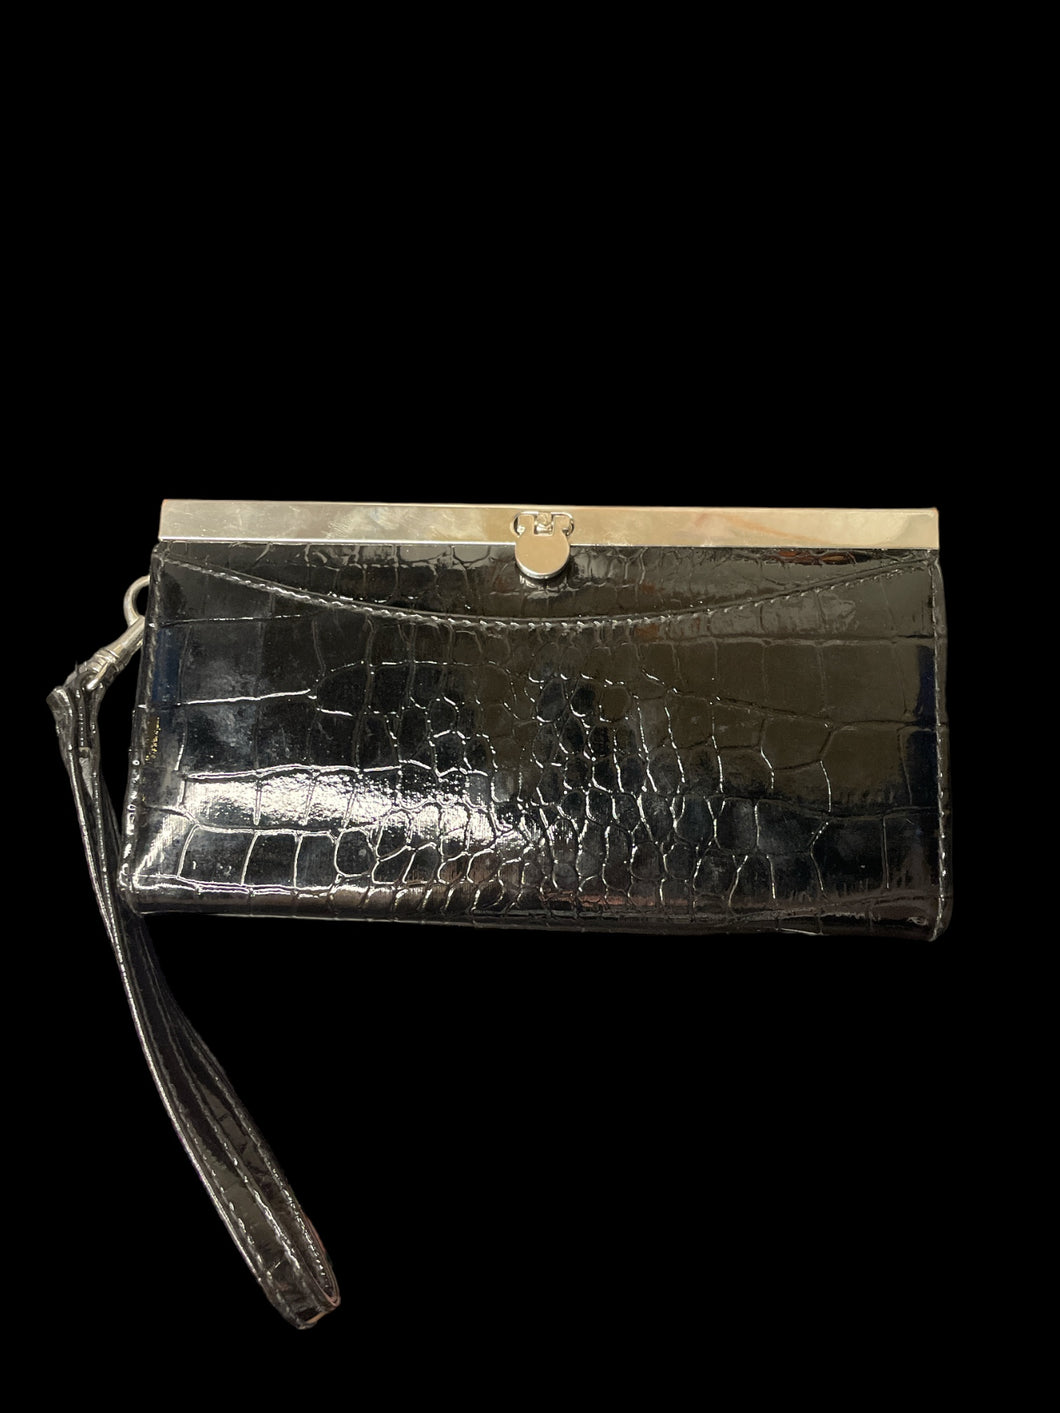 Shiny black faux crocodile skin clutch wallet w/ matching removable strap, silver-like closure w/ hinged lock, & inner pockets